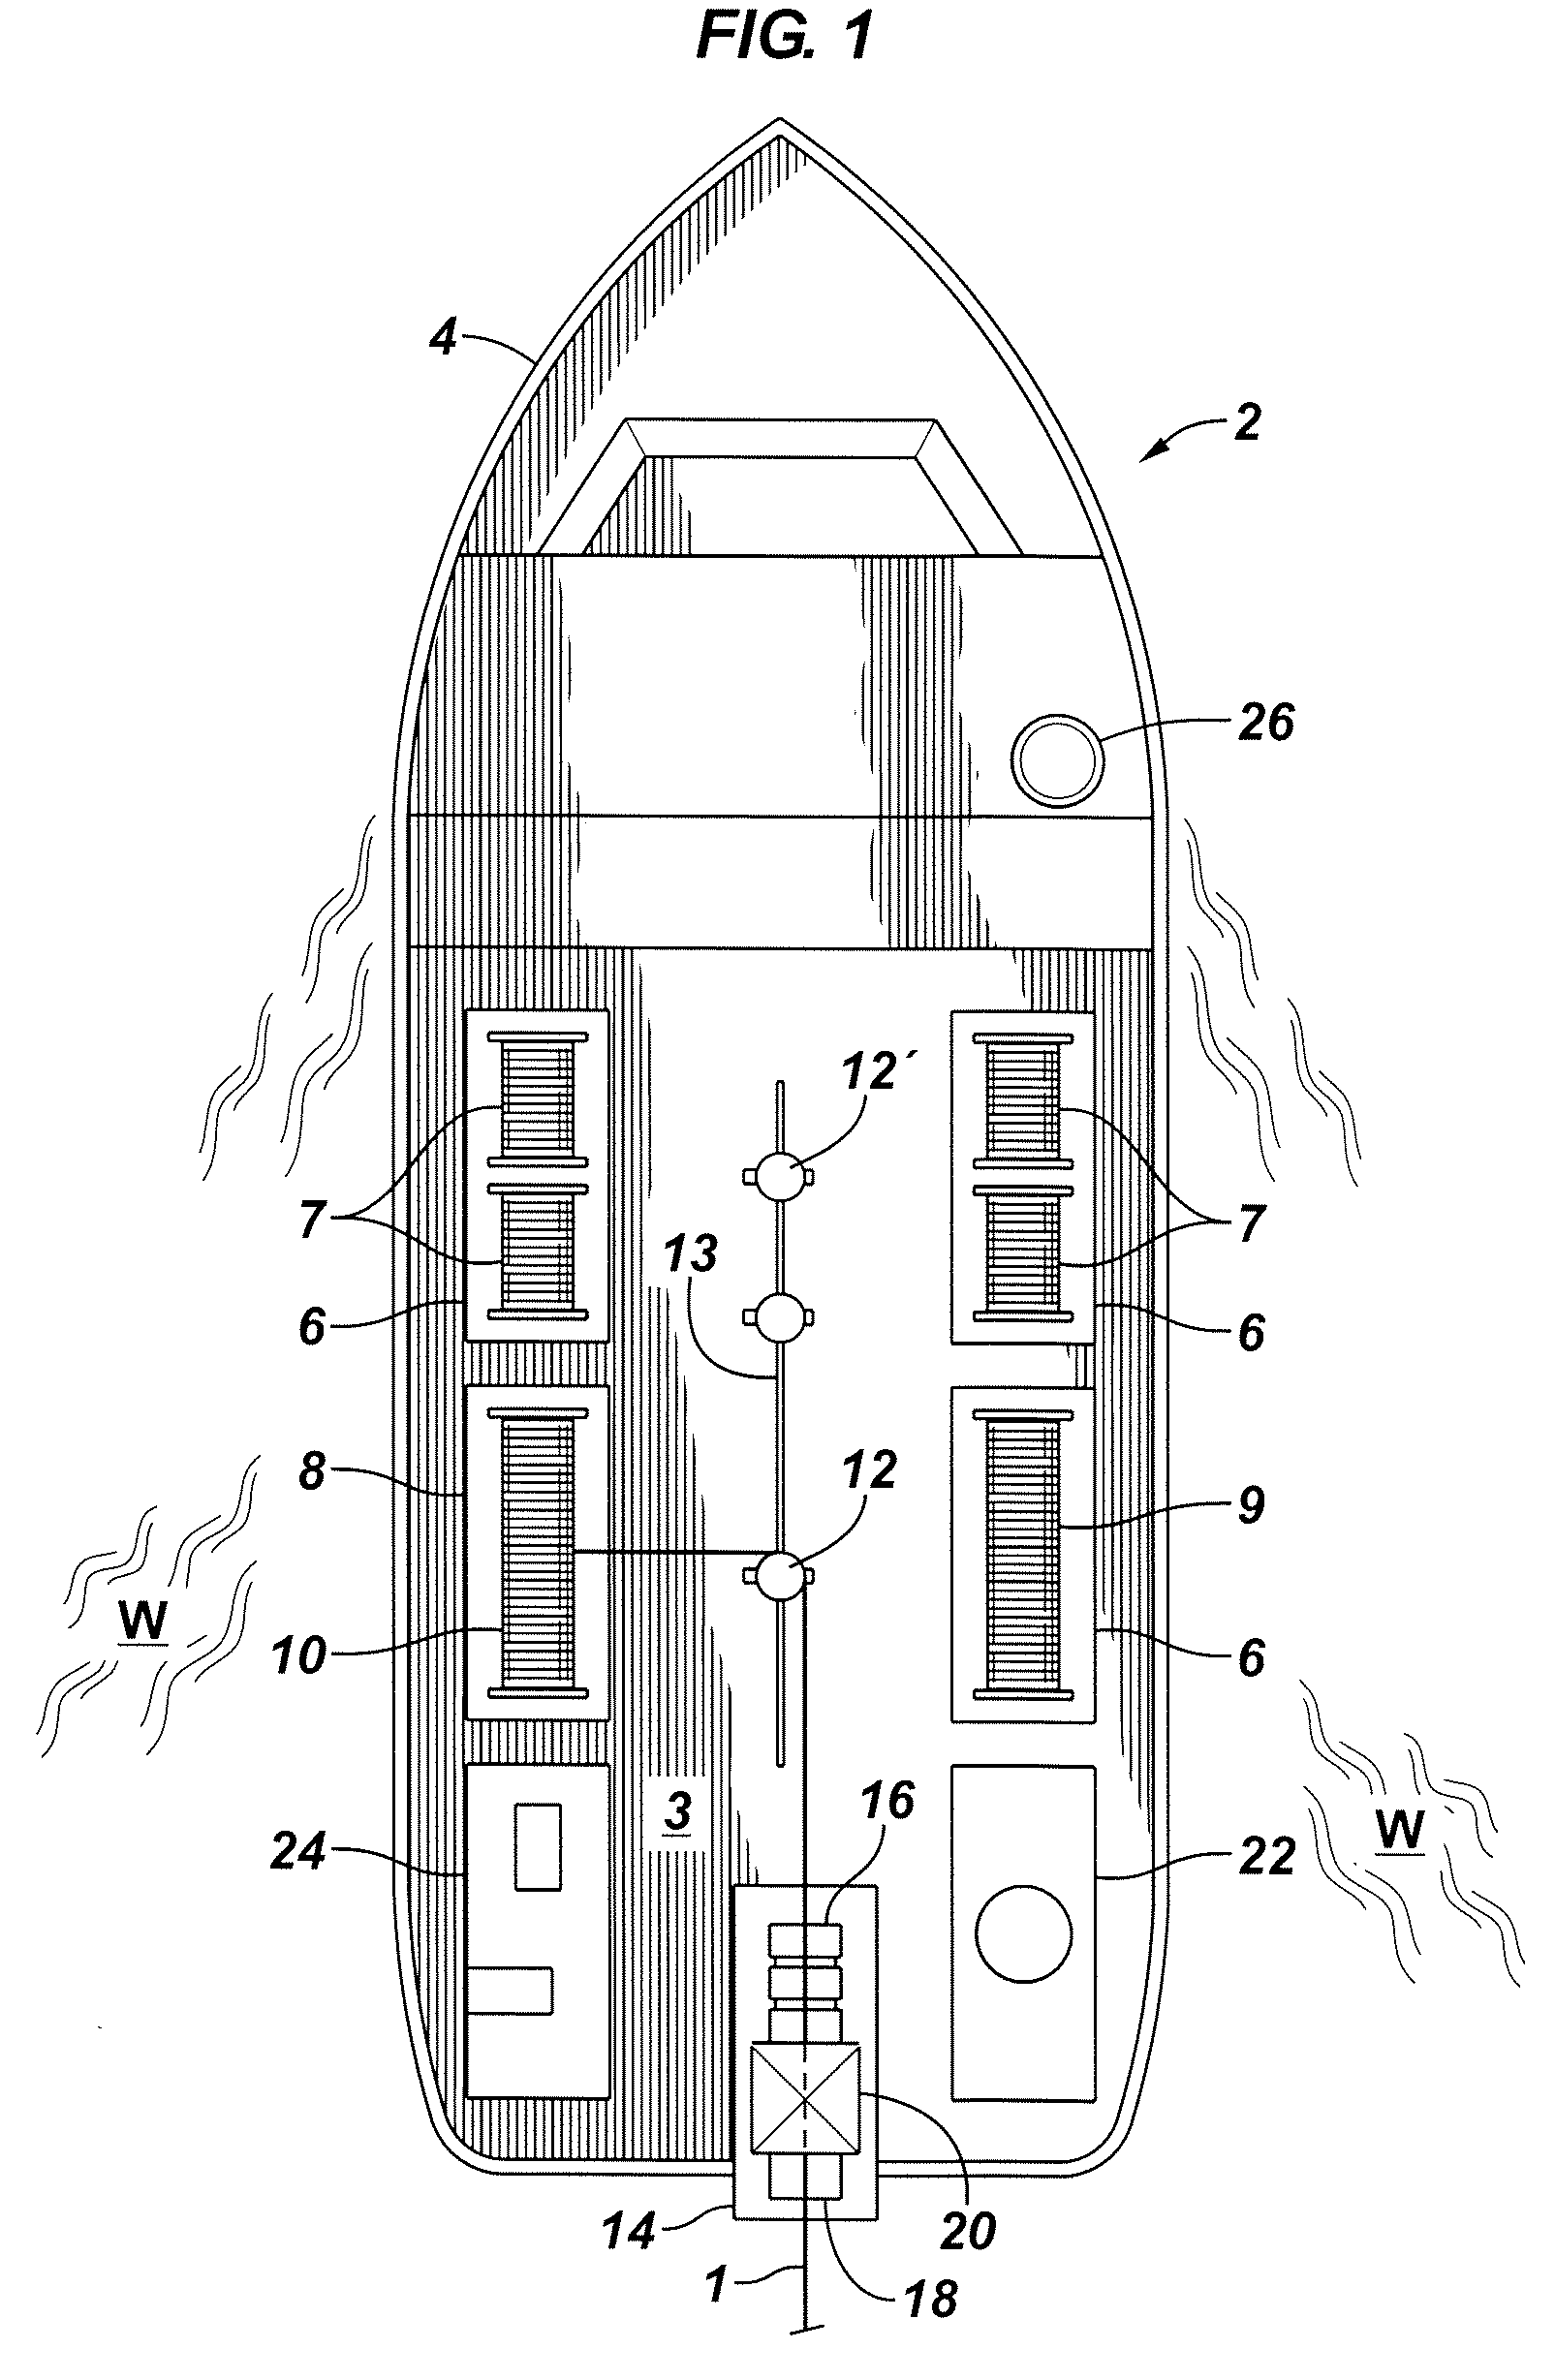 Containerized Geophysical Equipment Handling and Storage Systems, and Methods of Use